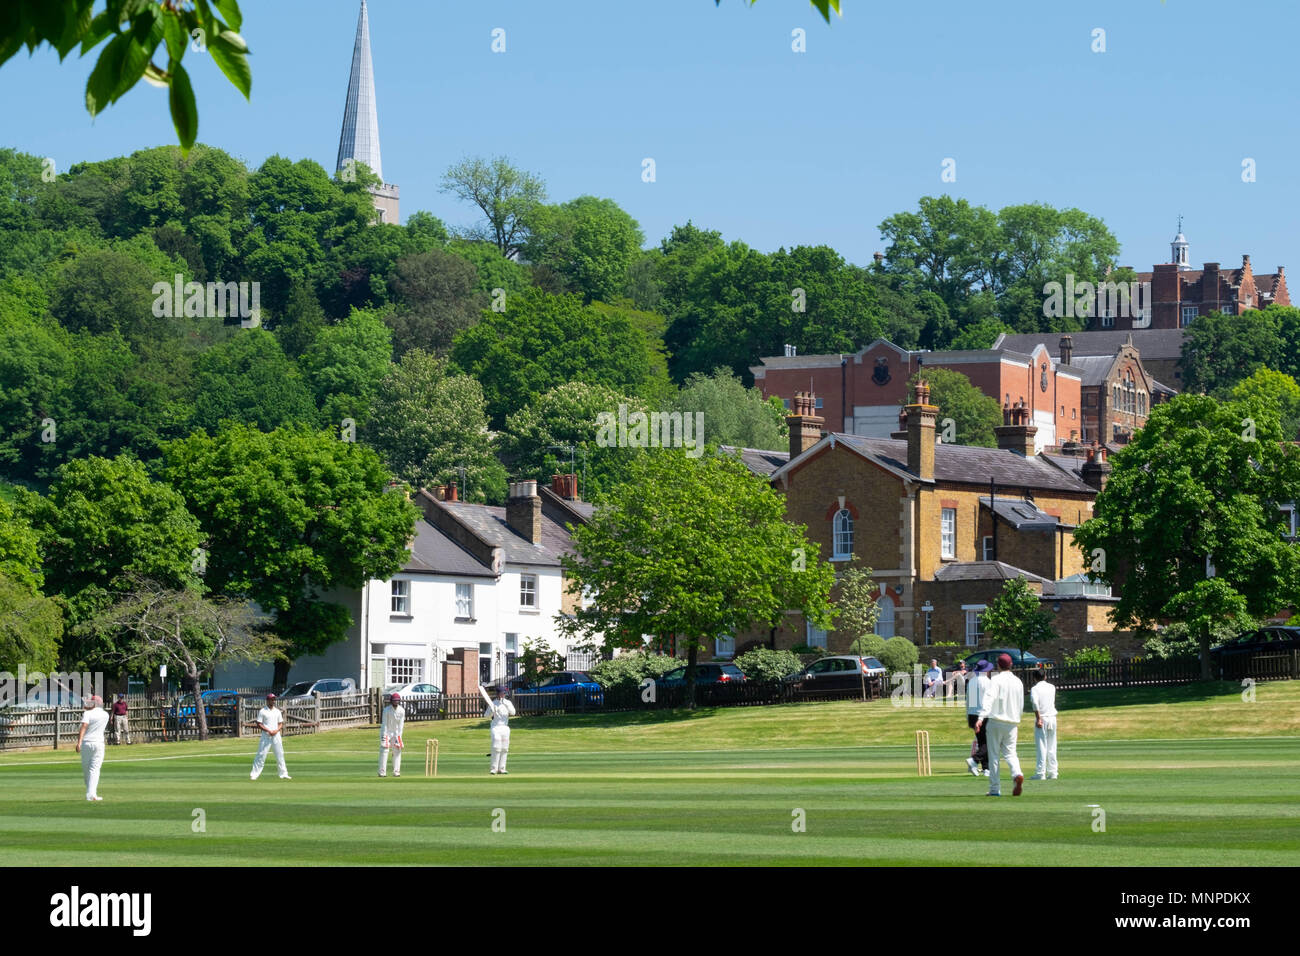 Harrow, London, England, 19th May 2018.  A cricket match is underway on the slopes of Harrow-on-the-Hill on a beautiful spring Saturday © Tim Ring/Alamy Live News Stock Photo